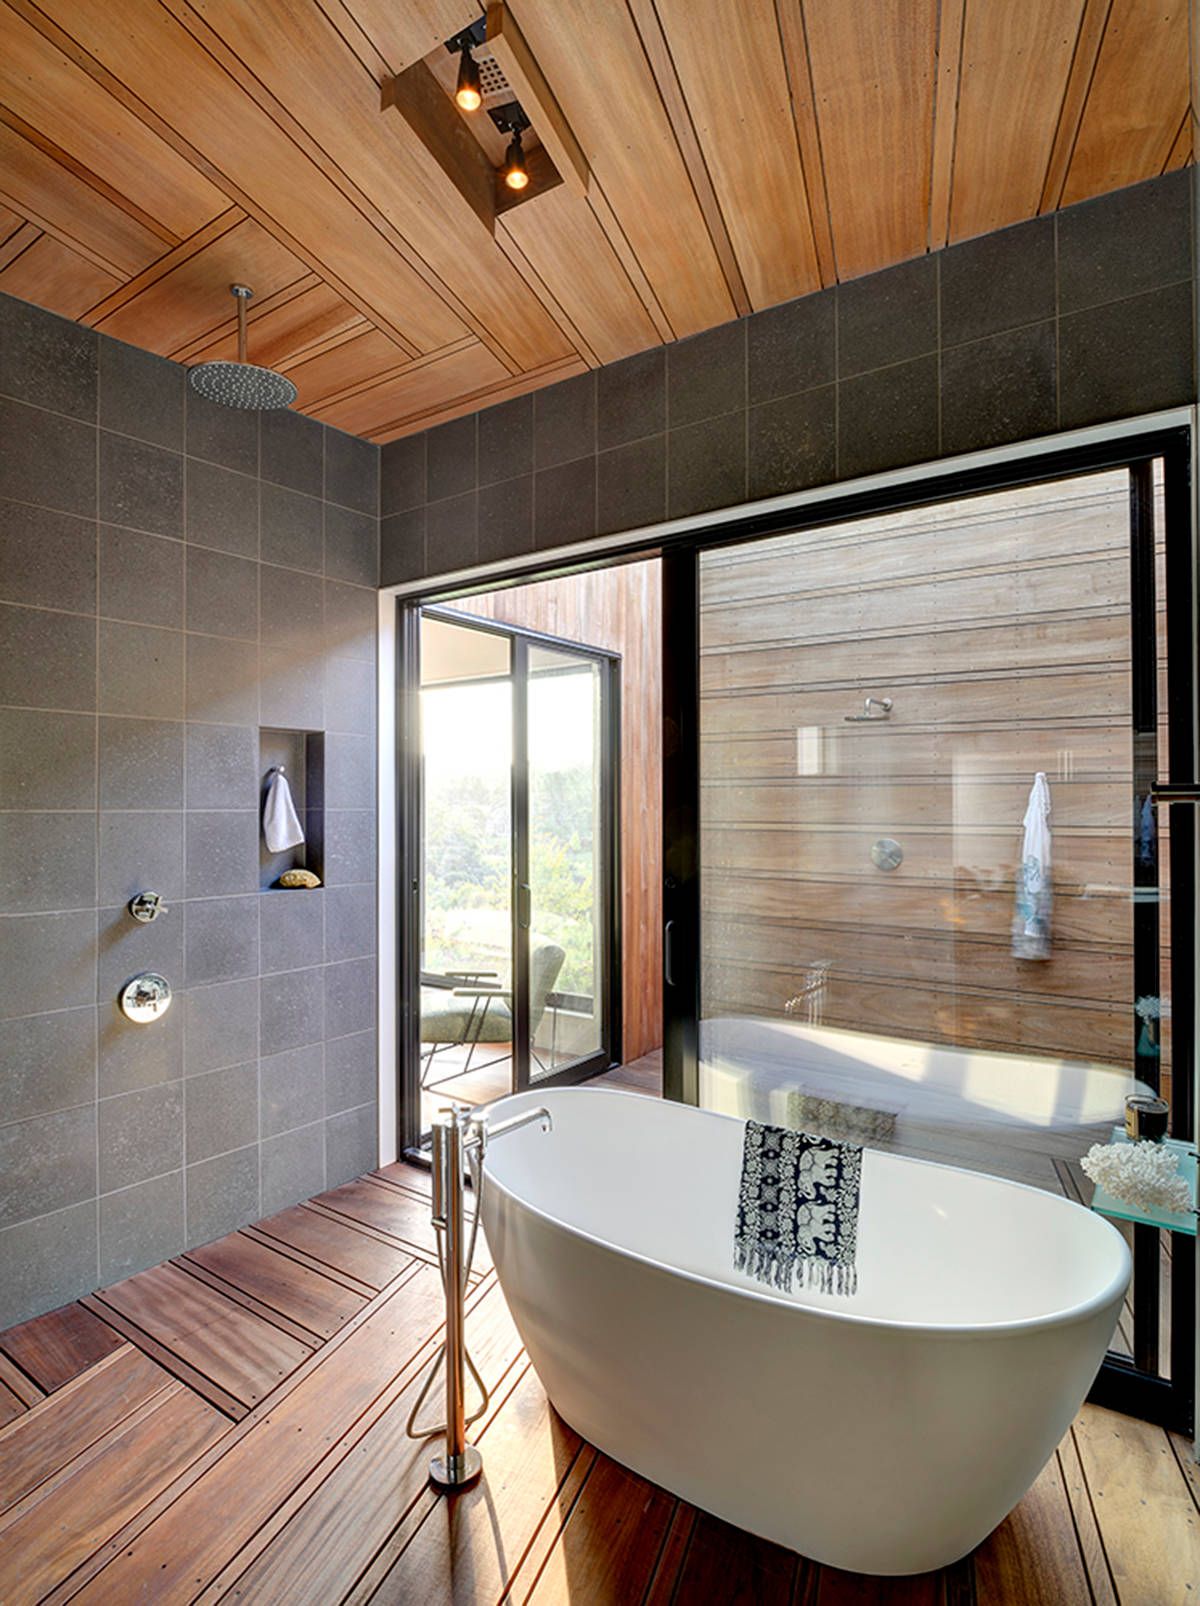 Modern-bathroom-of-New-York-home-in-gray-and-wood-with-freestanding-bathtub-and-rainfall-shower-54561